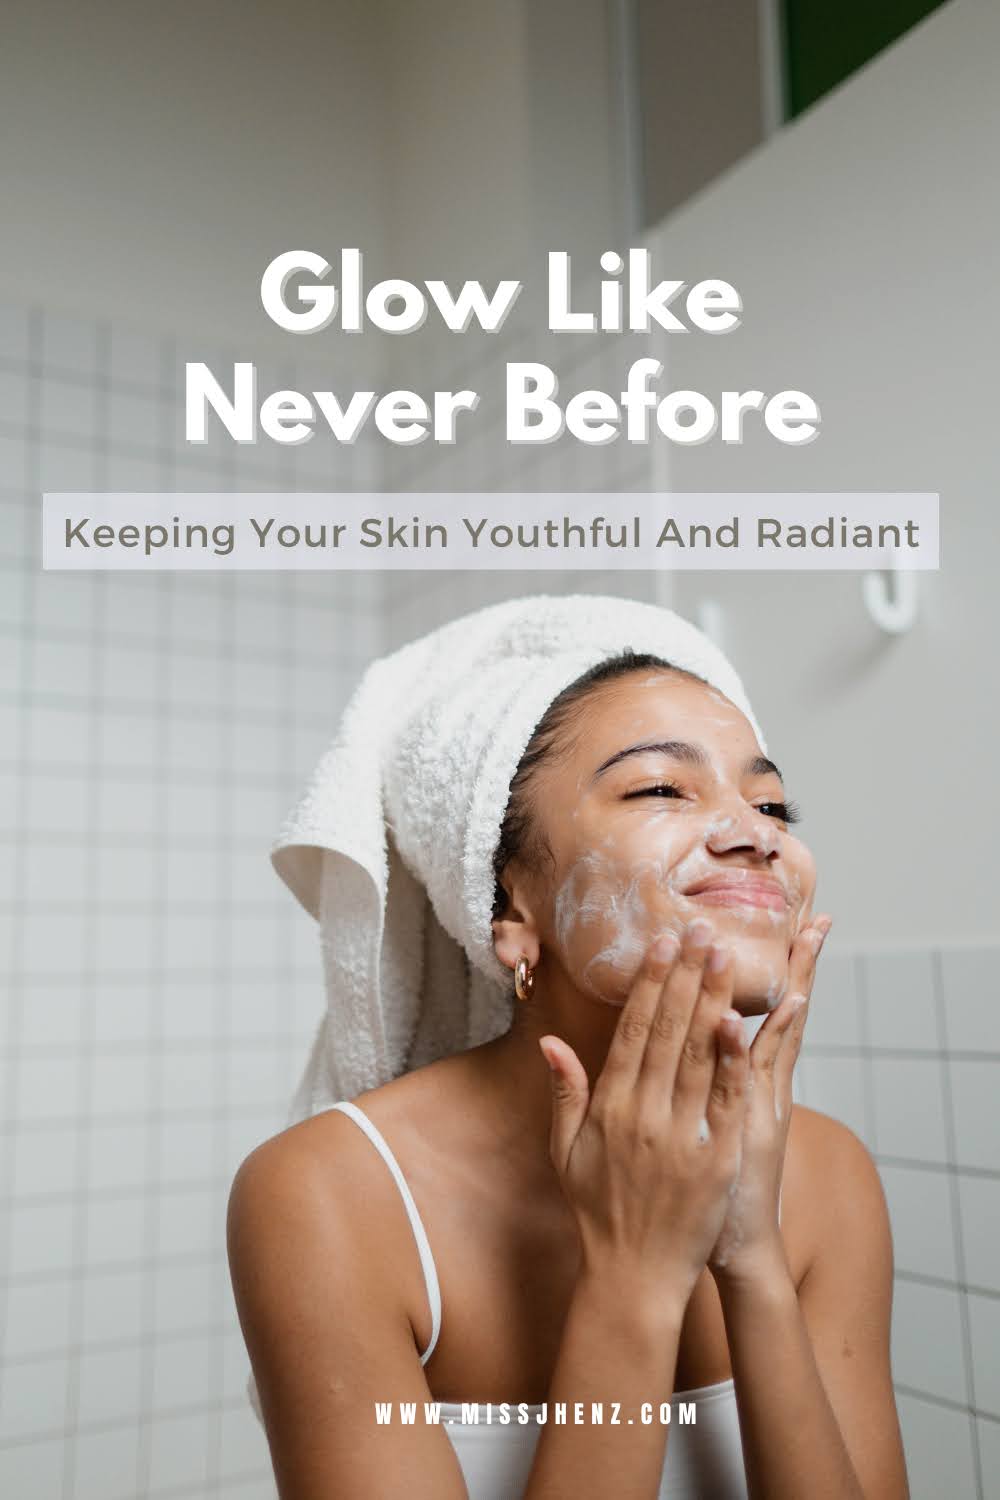 Glow Like Never Before: Keeping Your Skin Youthful And Radiant